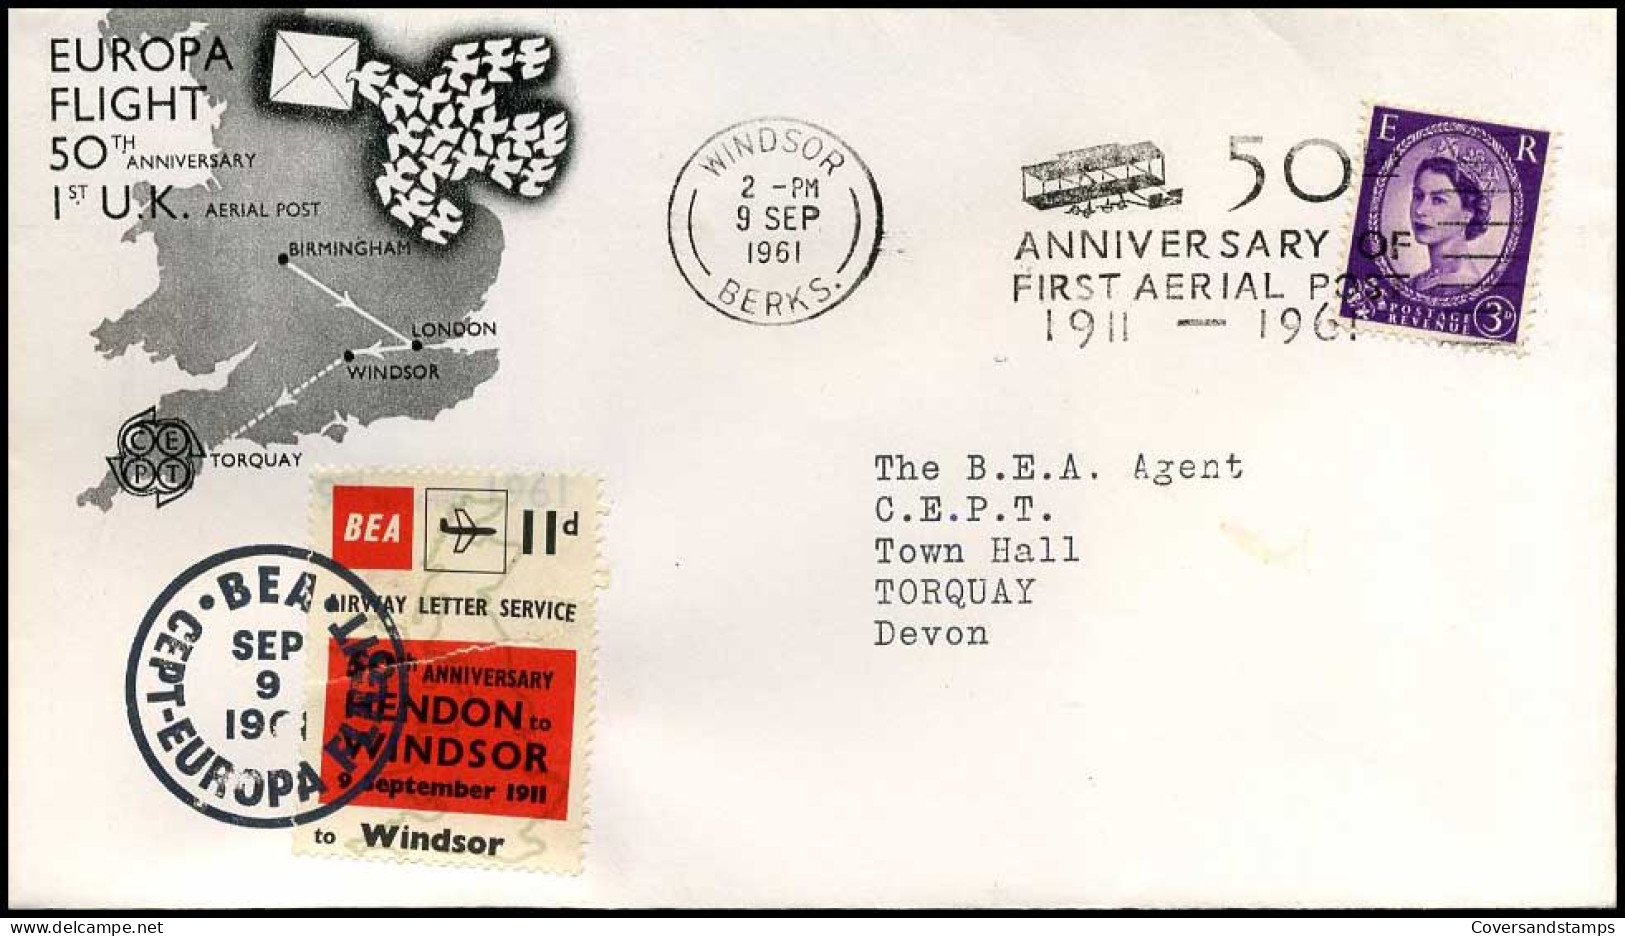 Great-Britain - Cover To Torquay -- Europa Flight, 50th Anniversary 1st UK Aerial Post - Covers & Documents